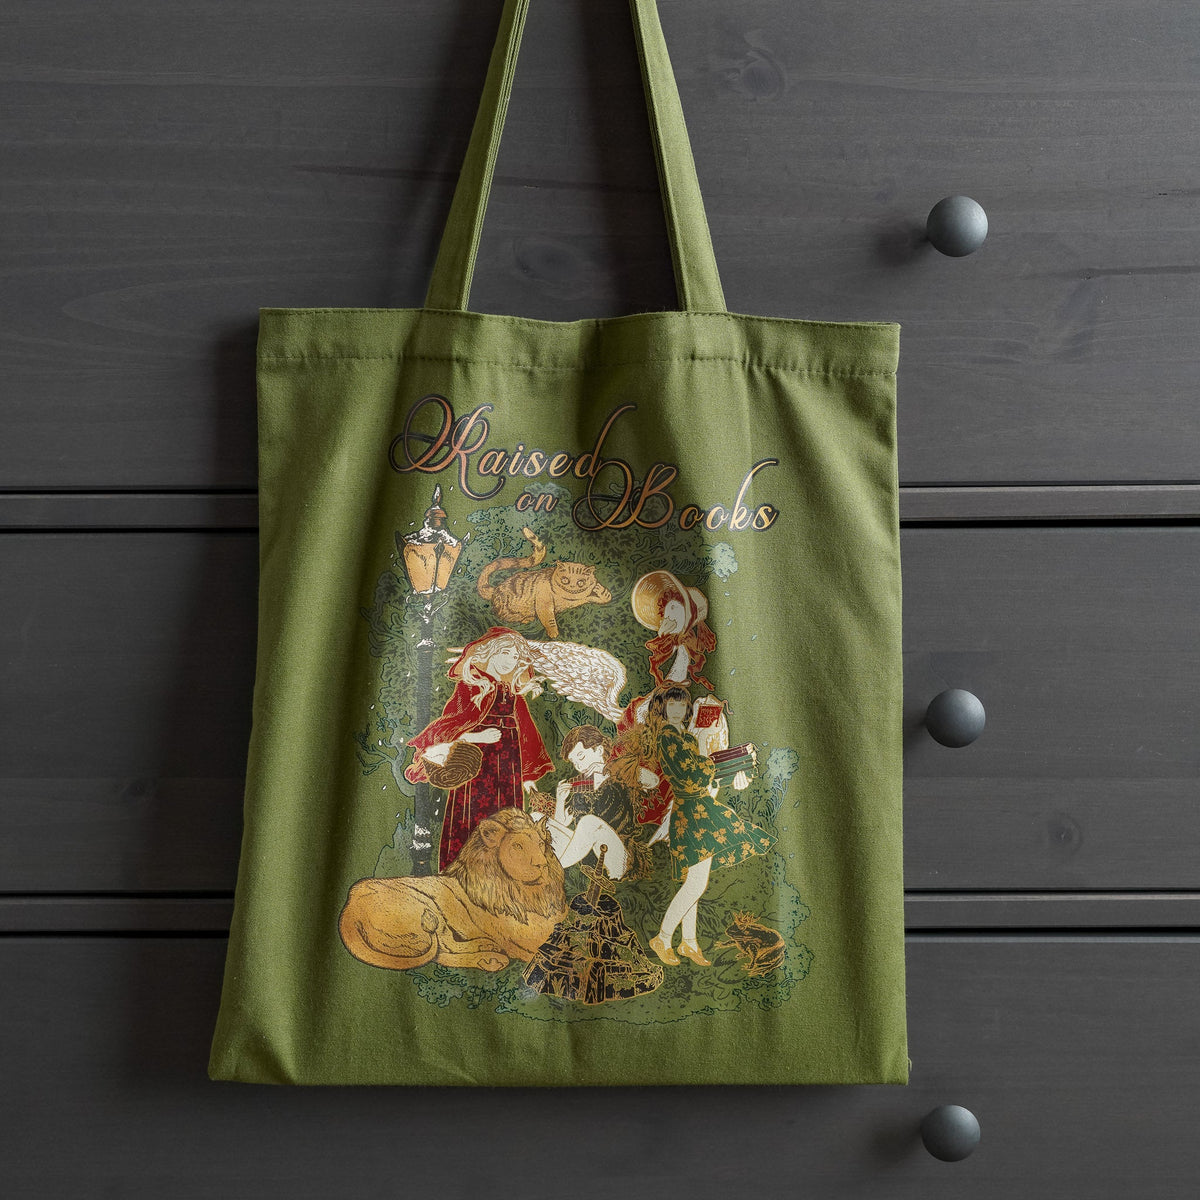 Raised on Books Tote featuring storybook characters in green, gold, and red colors.